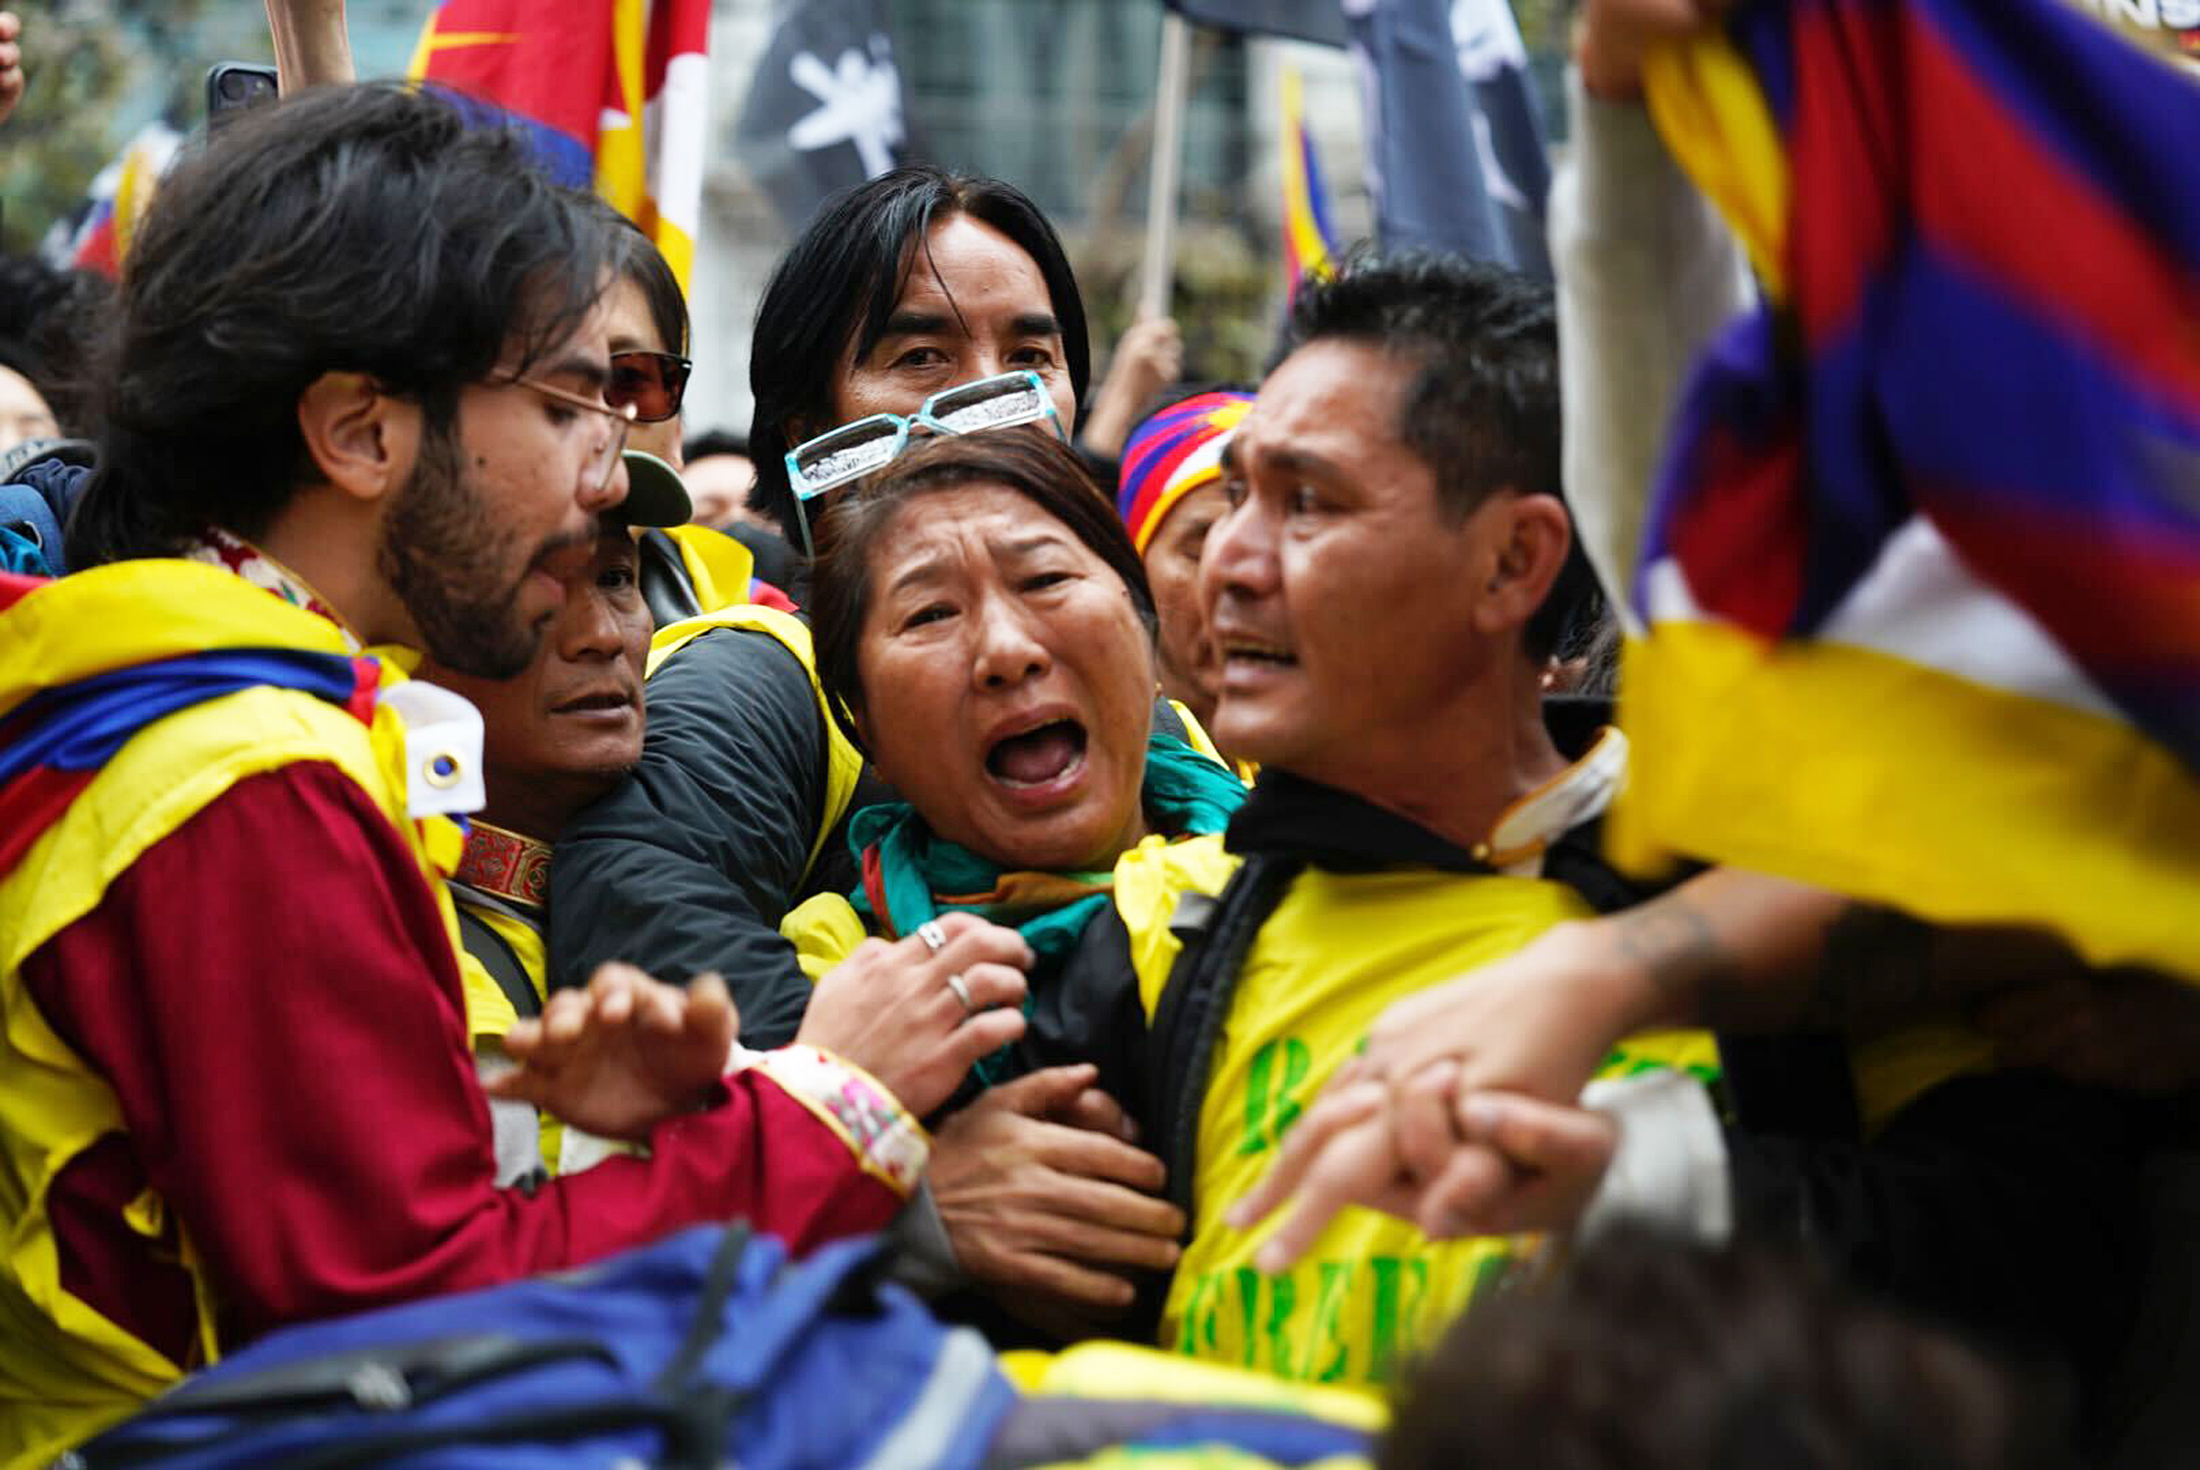 A woman screams while in the middle of dozens of people during a protest with Tibetan flags in the background.